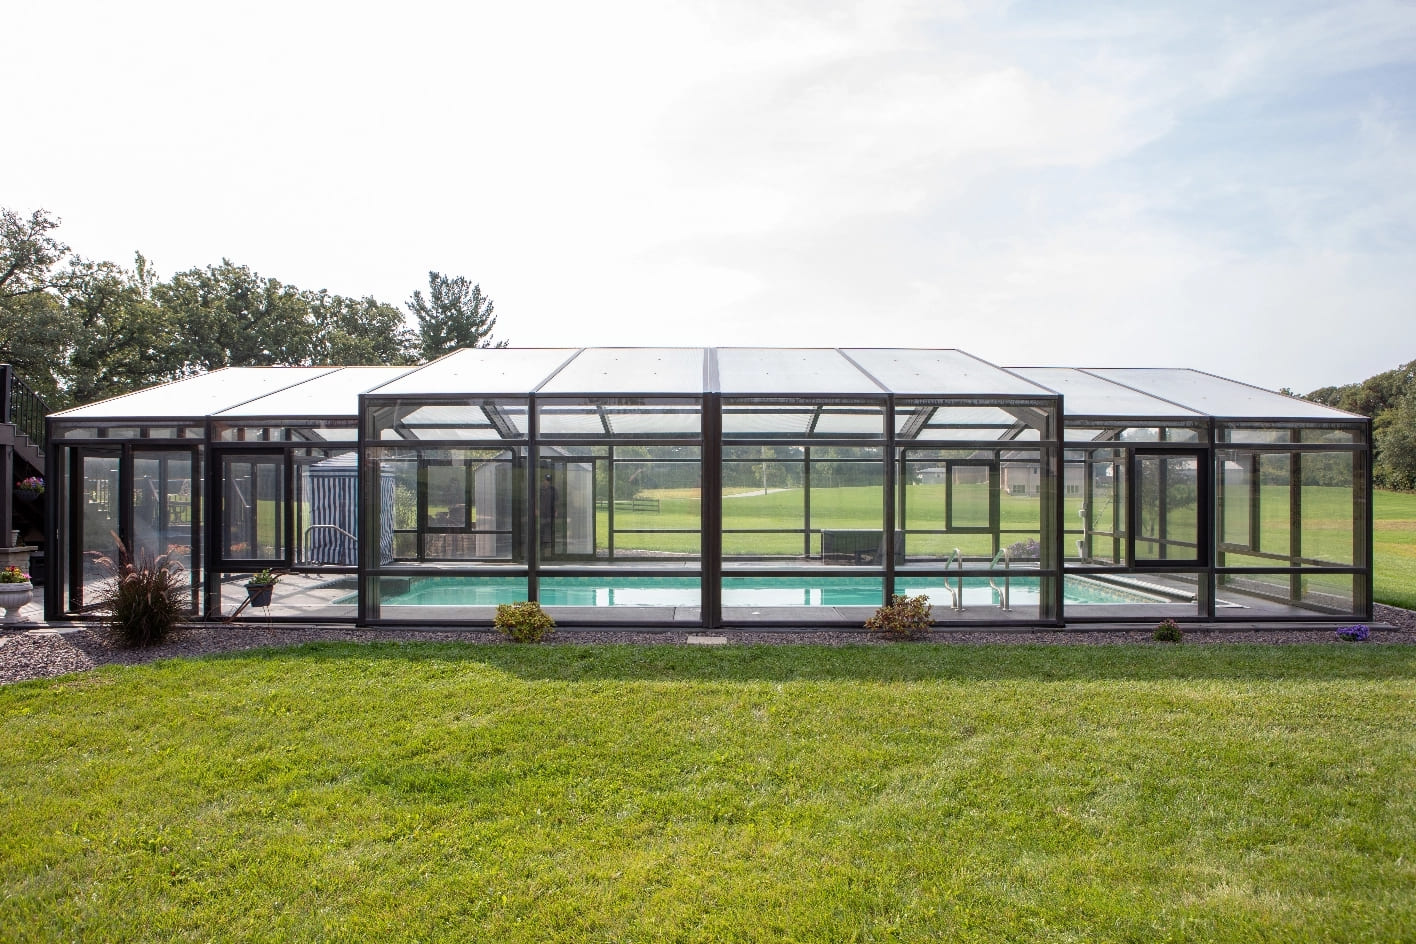 DynaDome | A glass enclosed swimming pool in a backyard, perfect for a tranquil home oasis.